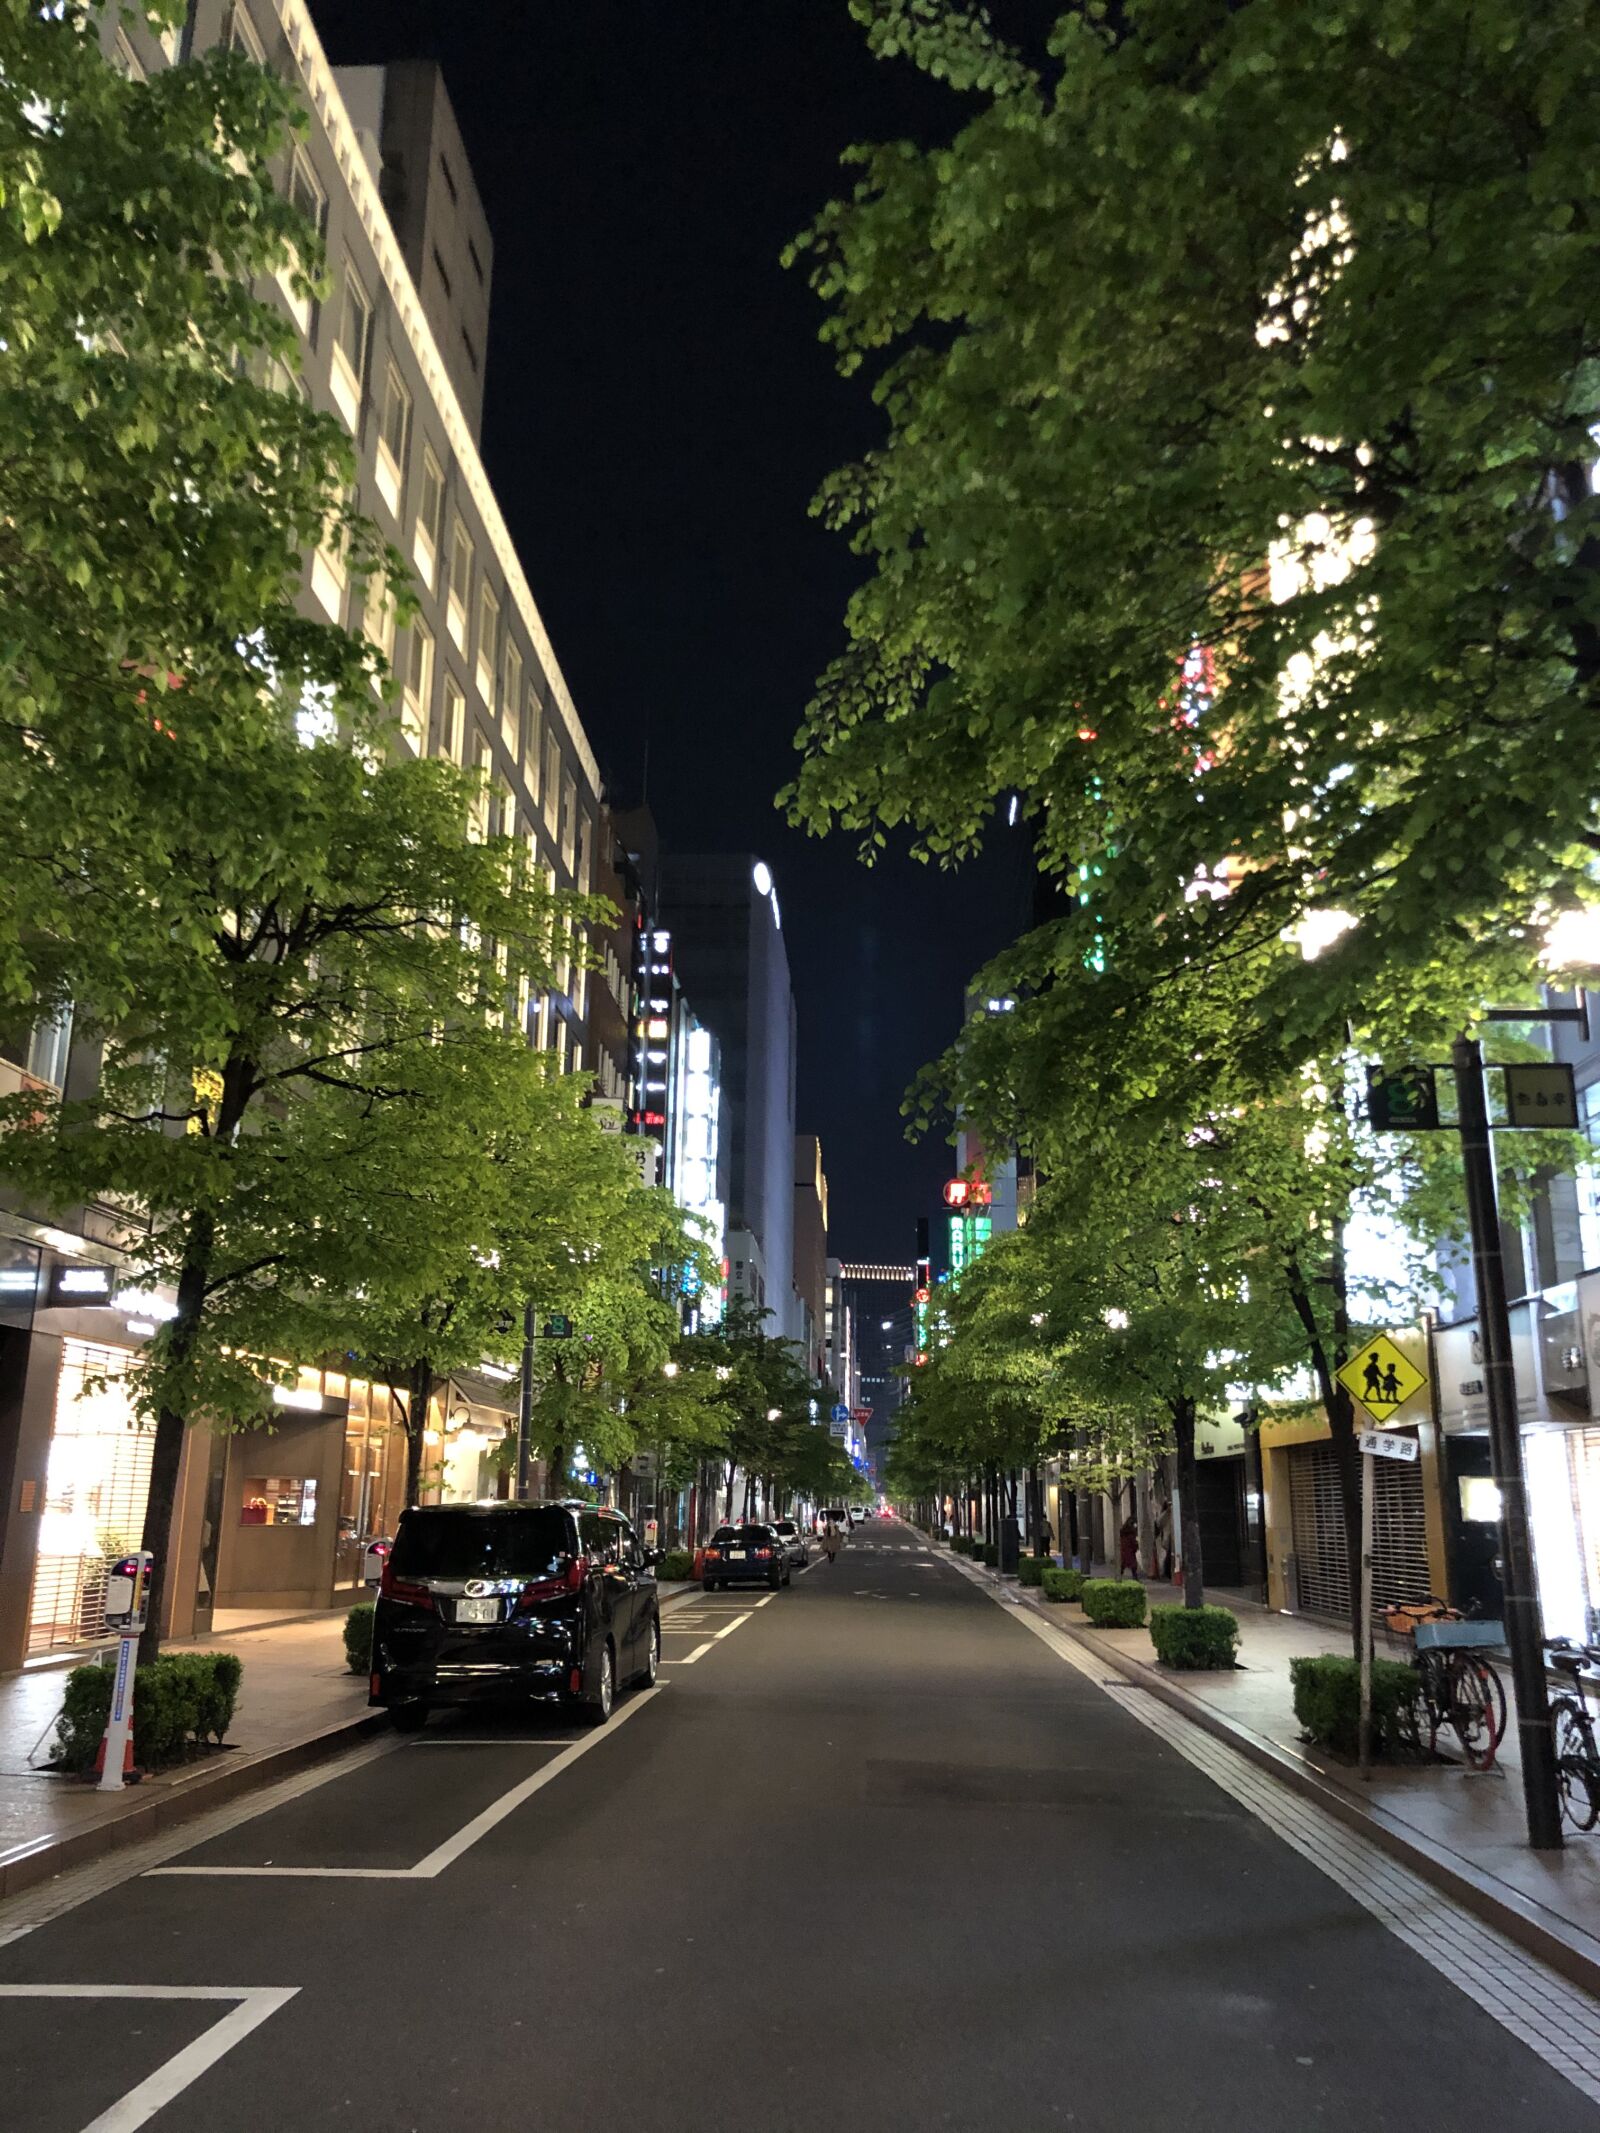 Apple iPhone X + iPhone X back dual camera 4mm f/1.8 sample photo. Japan, night view, city photography